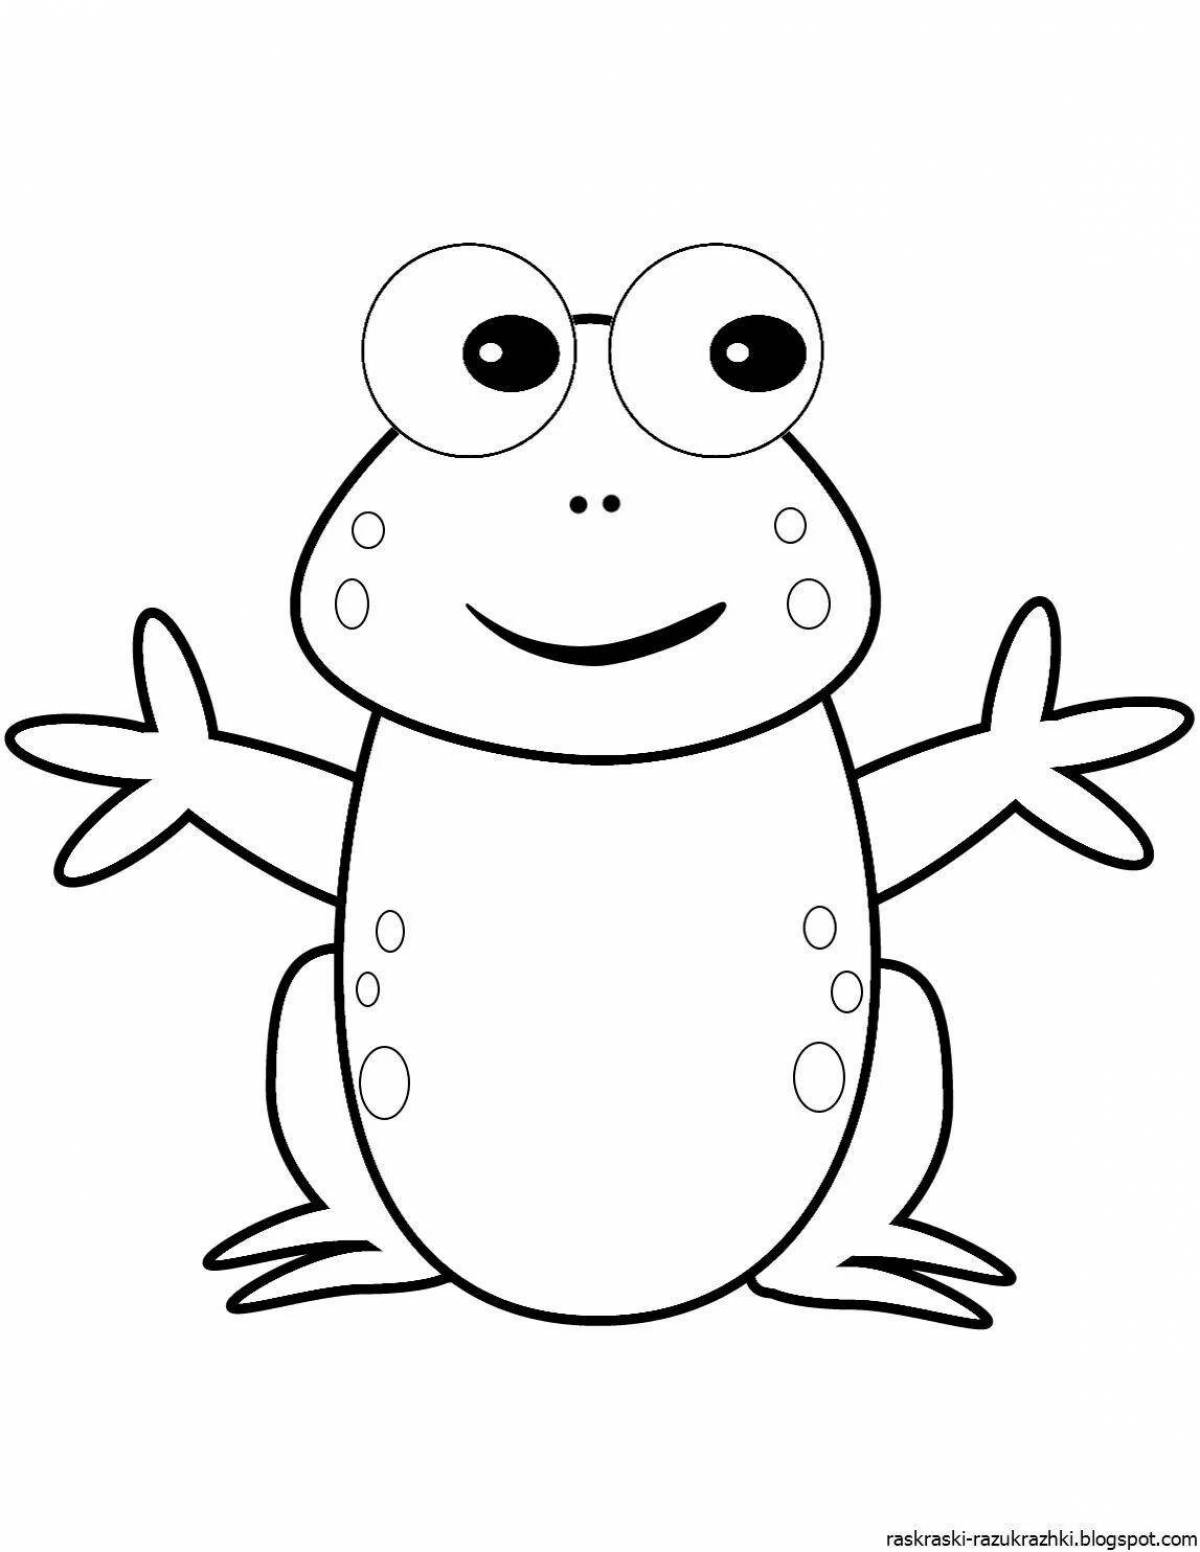 Coloring page cheerful frog-teremok